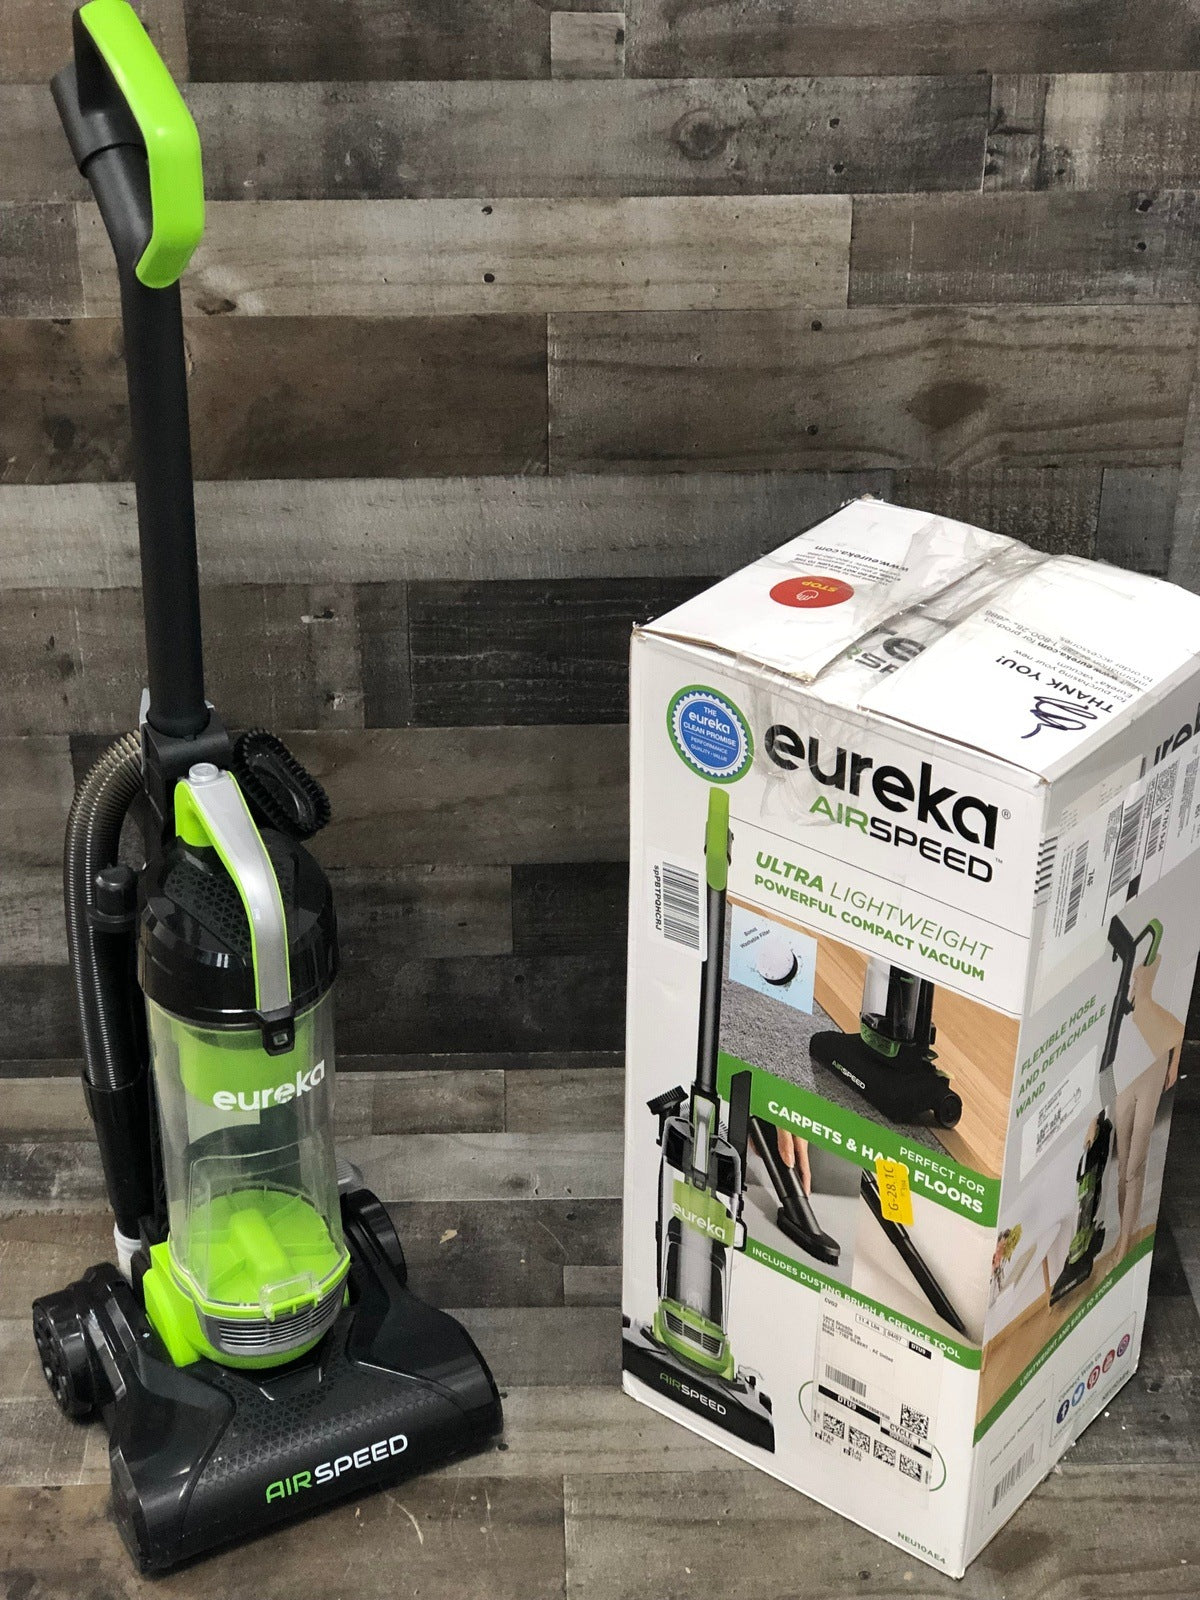 Eureka Powerful Bagless Upright Carpet and Floor Airspeed Ultra-Lightweight Vacuum Cleaner, w/Replacement Filter, Green